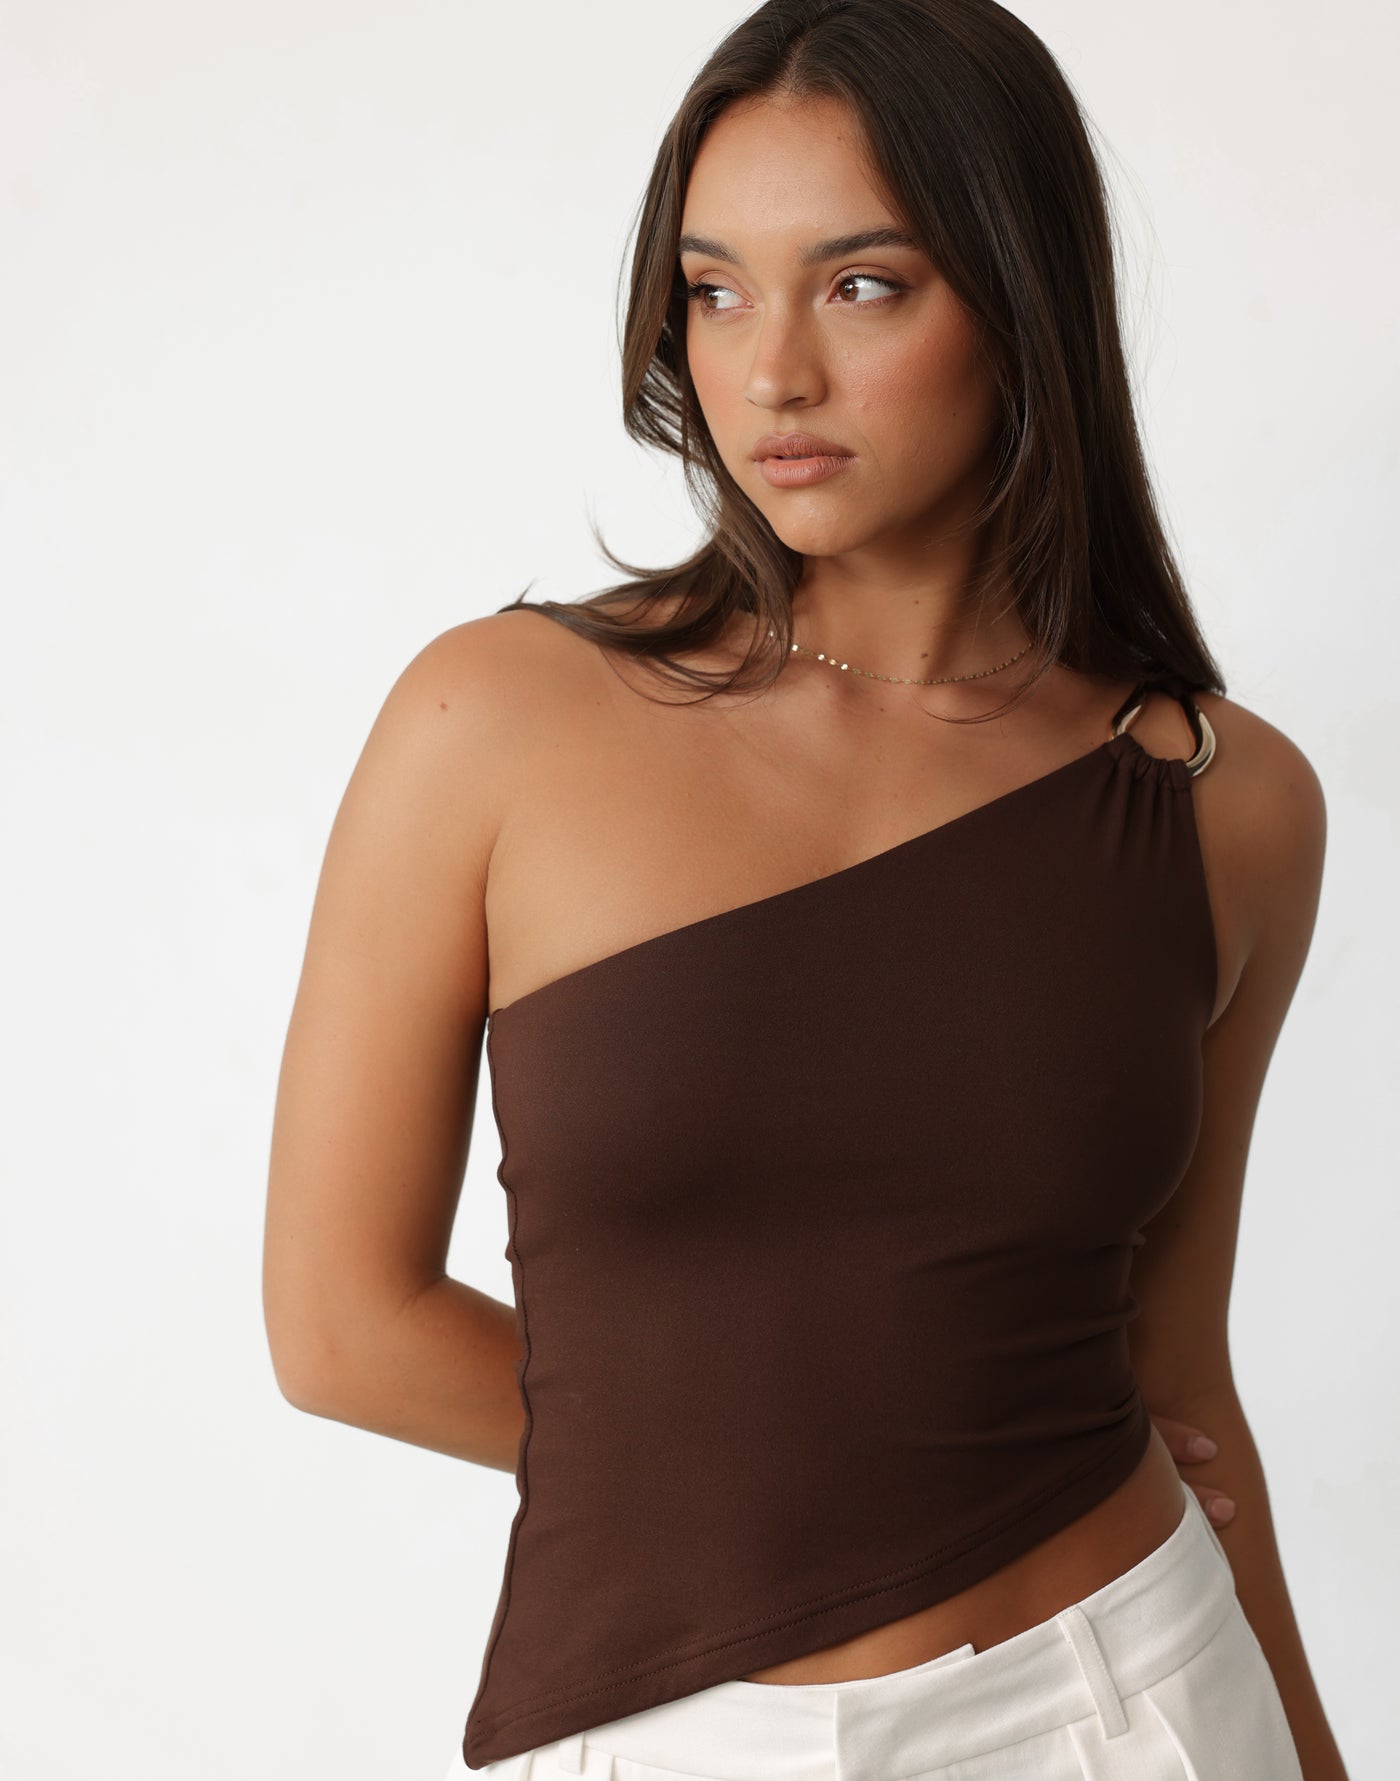 Mandi Top (Cocoa) | Charcoal Clothing Exclusive - Gold Embellishment Asymmetrical Butter Jersey Top - Women's Top - Charcoal Clothing